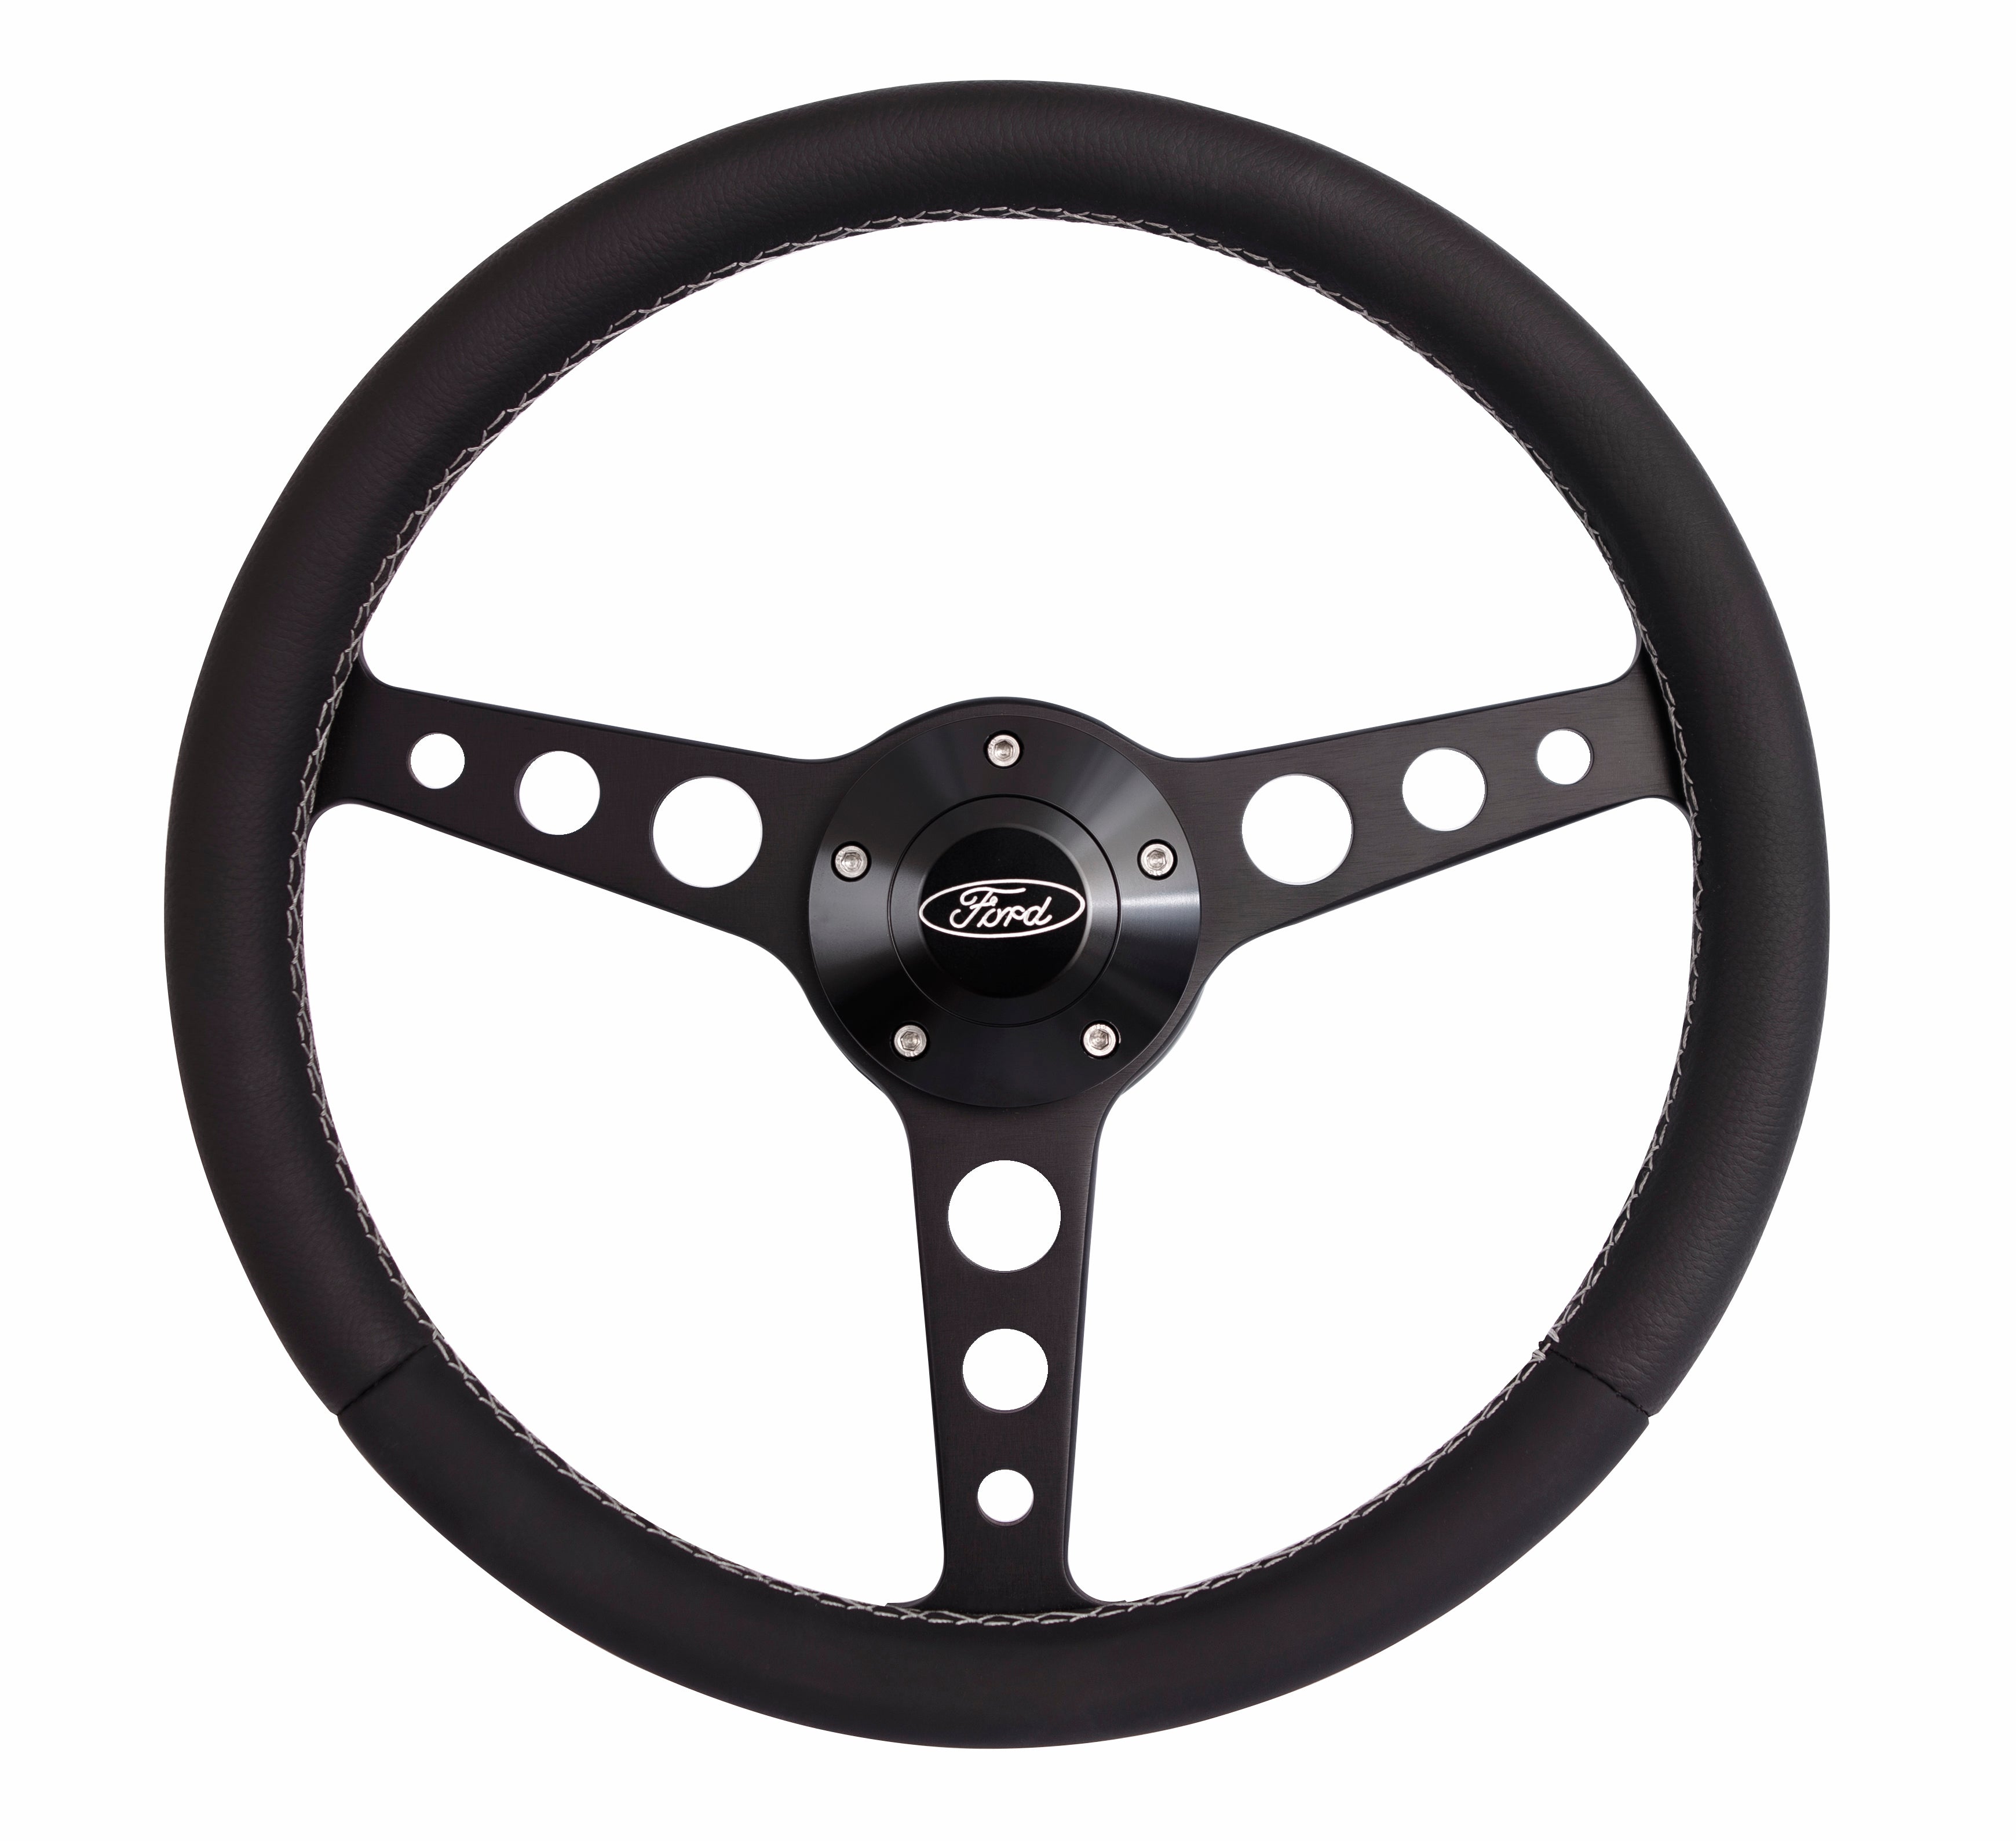 Grant Classic Series Blk Wheel Ford Logo/Install Kit Steering Wheels and Components Steering Wheels and Components main image